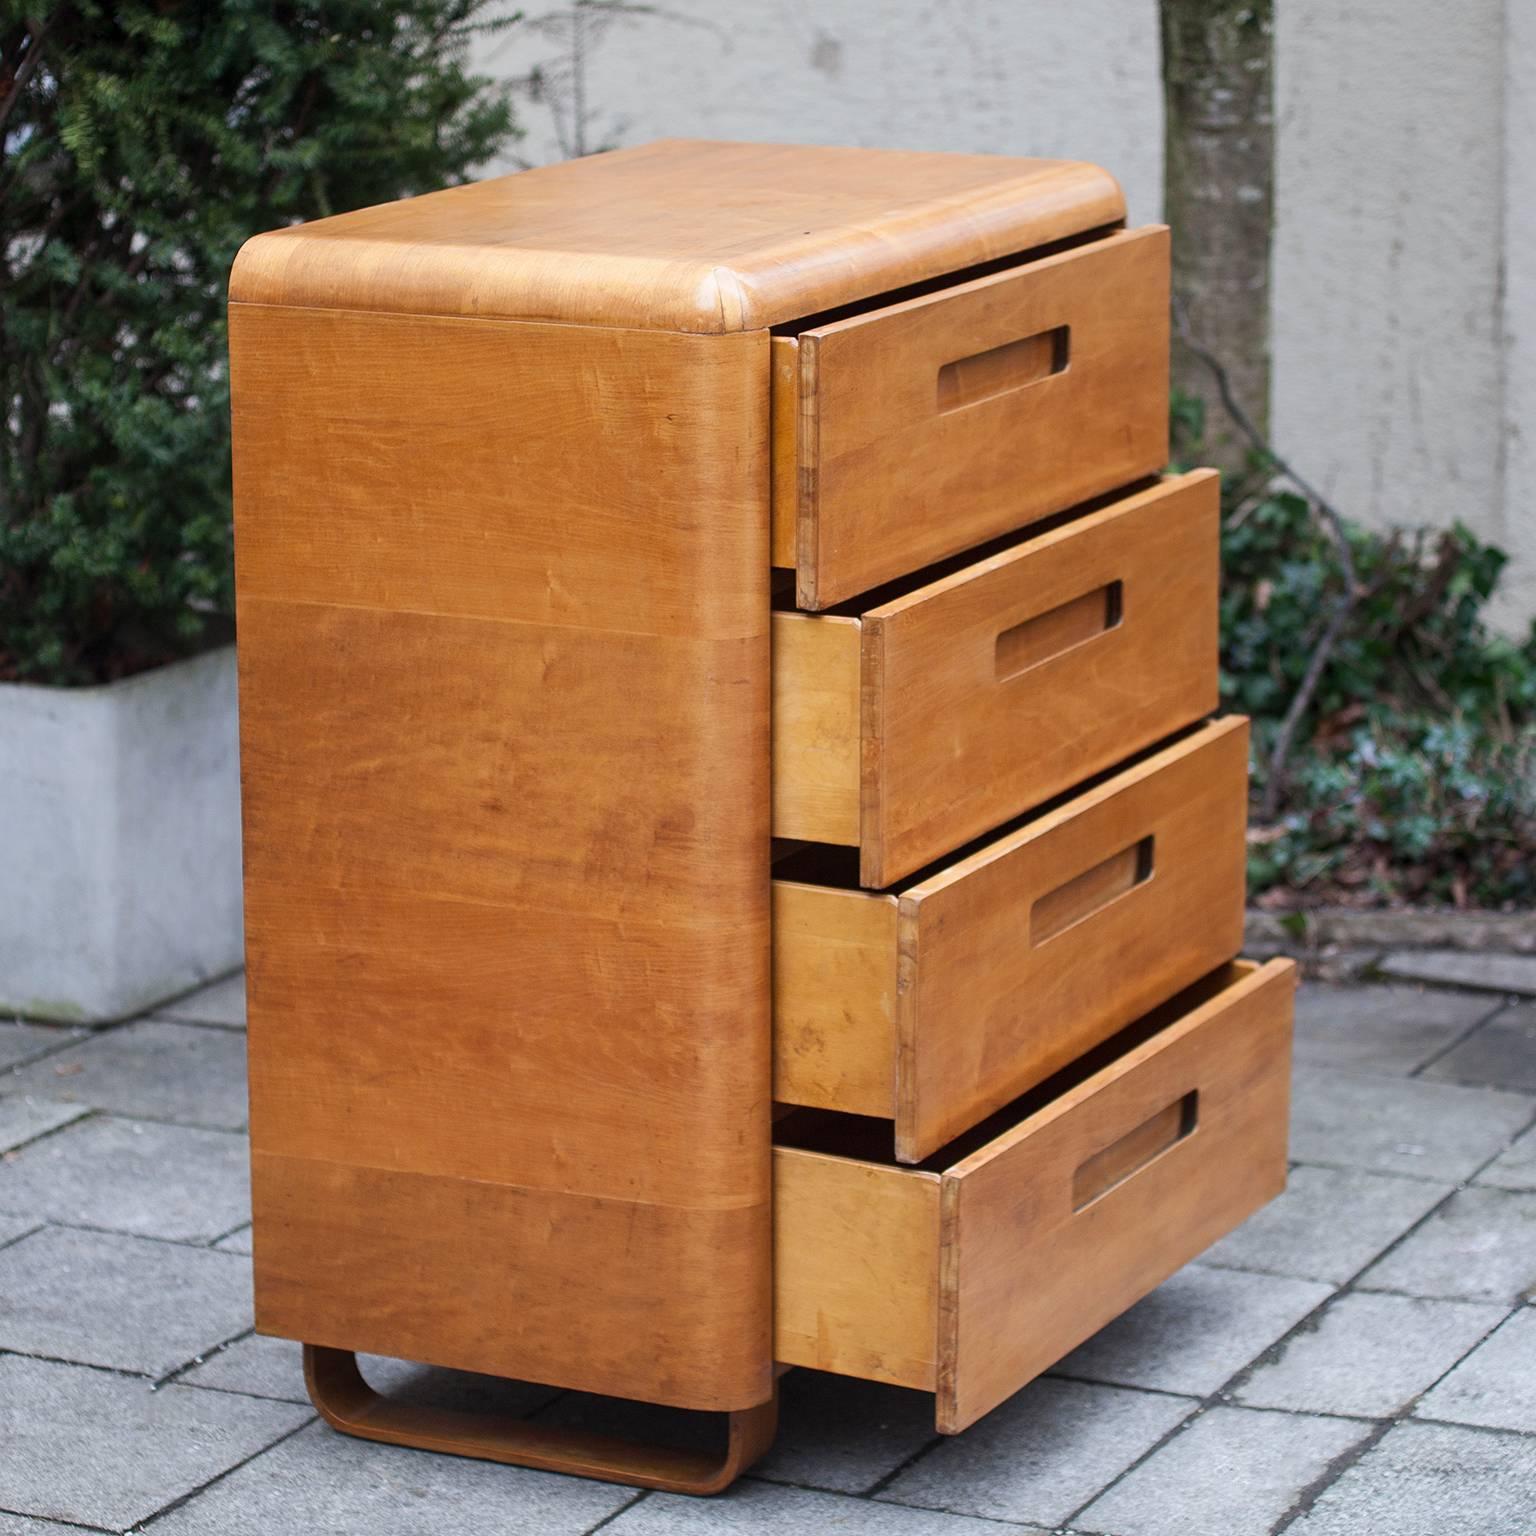 Wonderful dresser by Paul Goldman for Plycraft in 1946, this incredible molded birch-veneered dresser was part of the Plymodern line. Like Charles and Ray Eames, Goldman pioneered the molded plywood industry, in fact, he is considered the father of